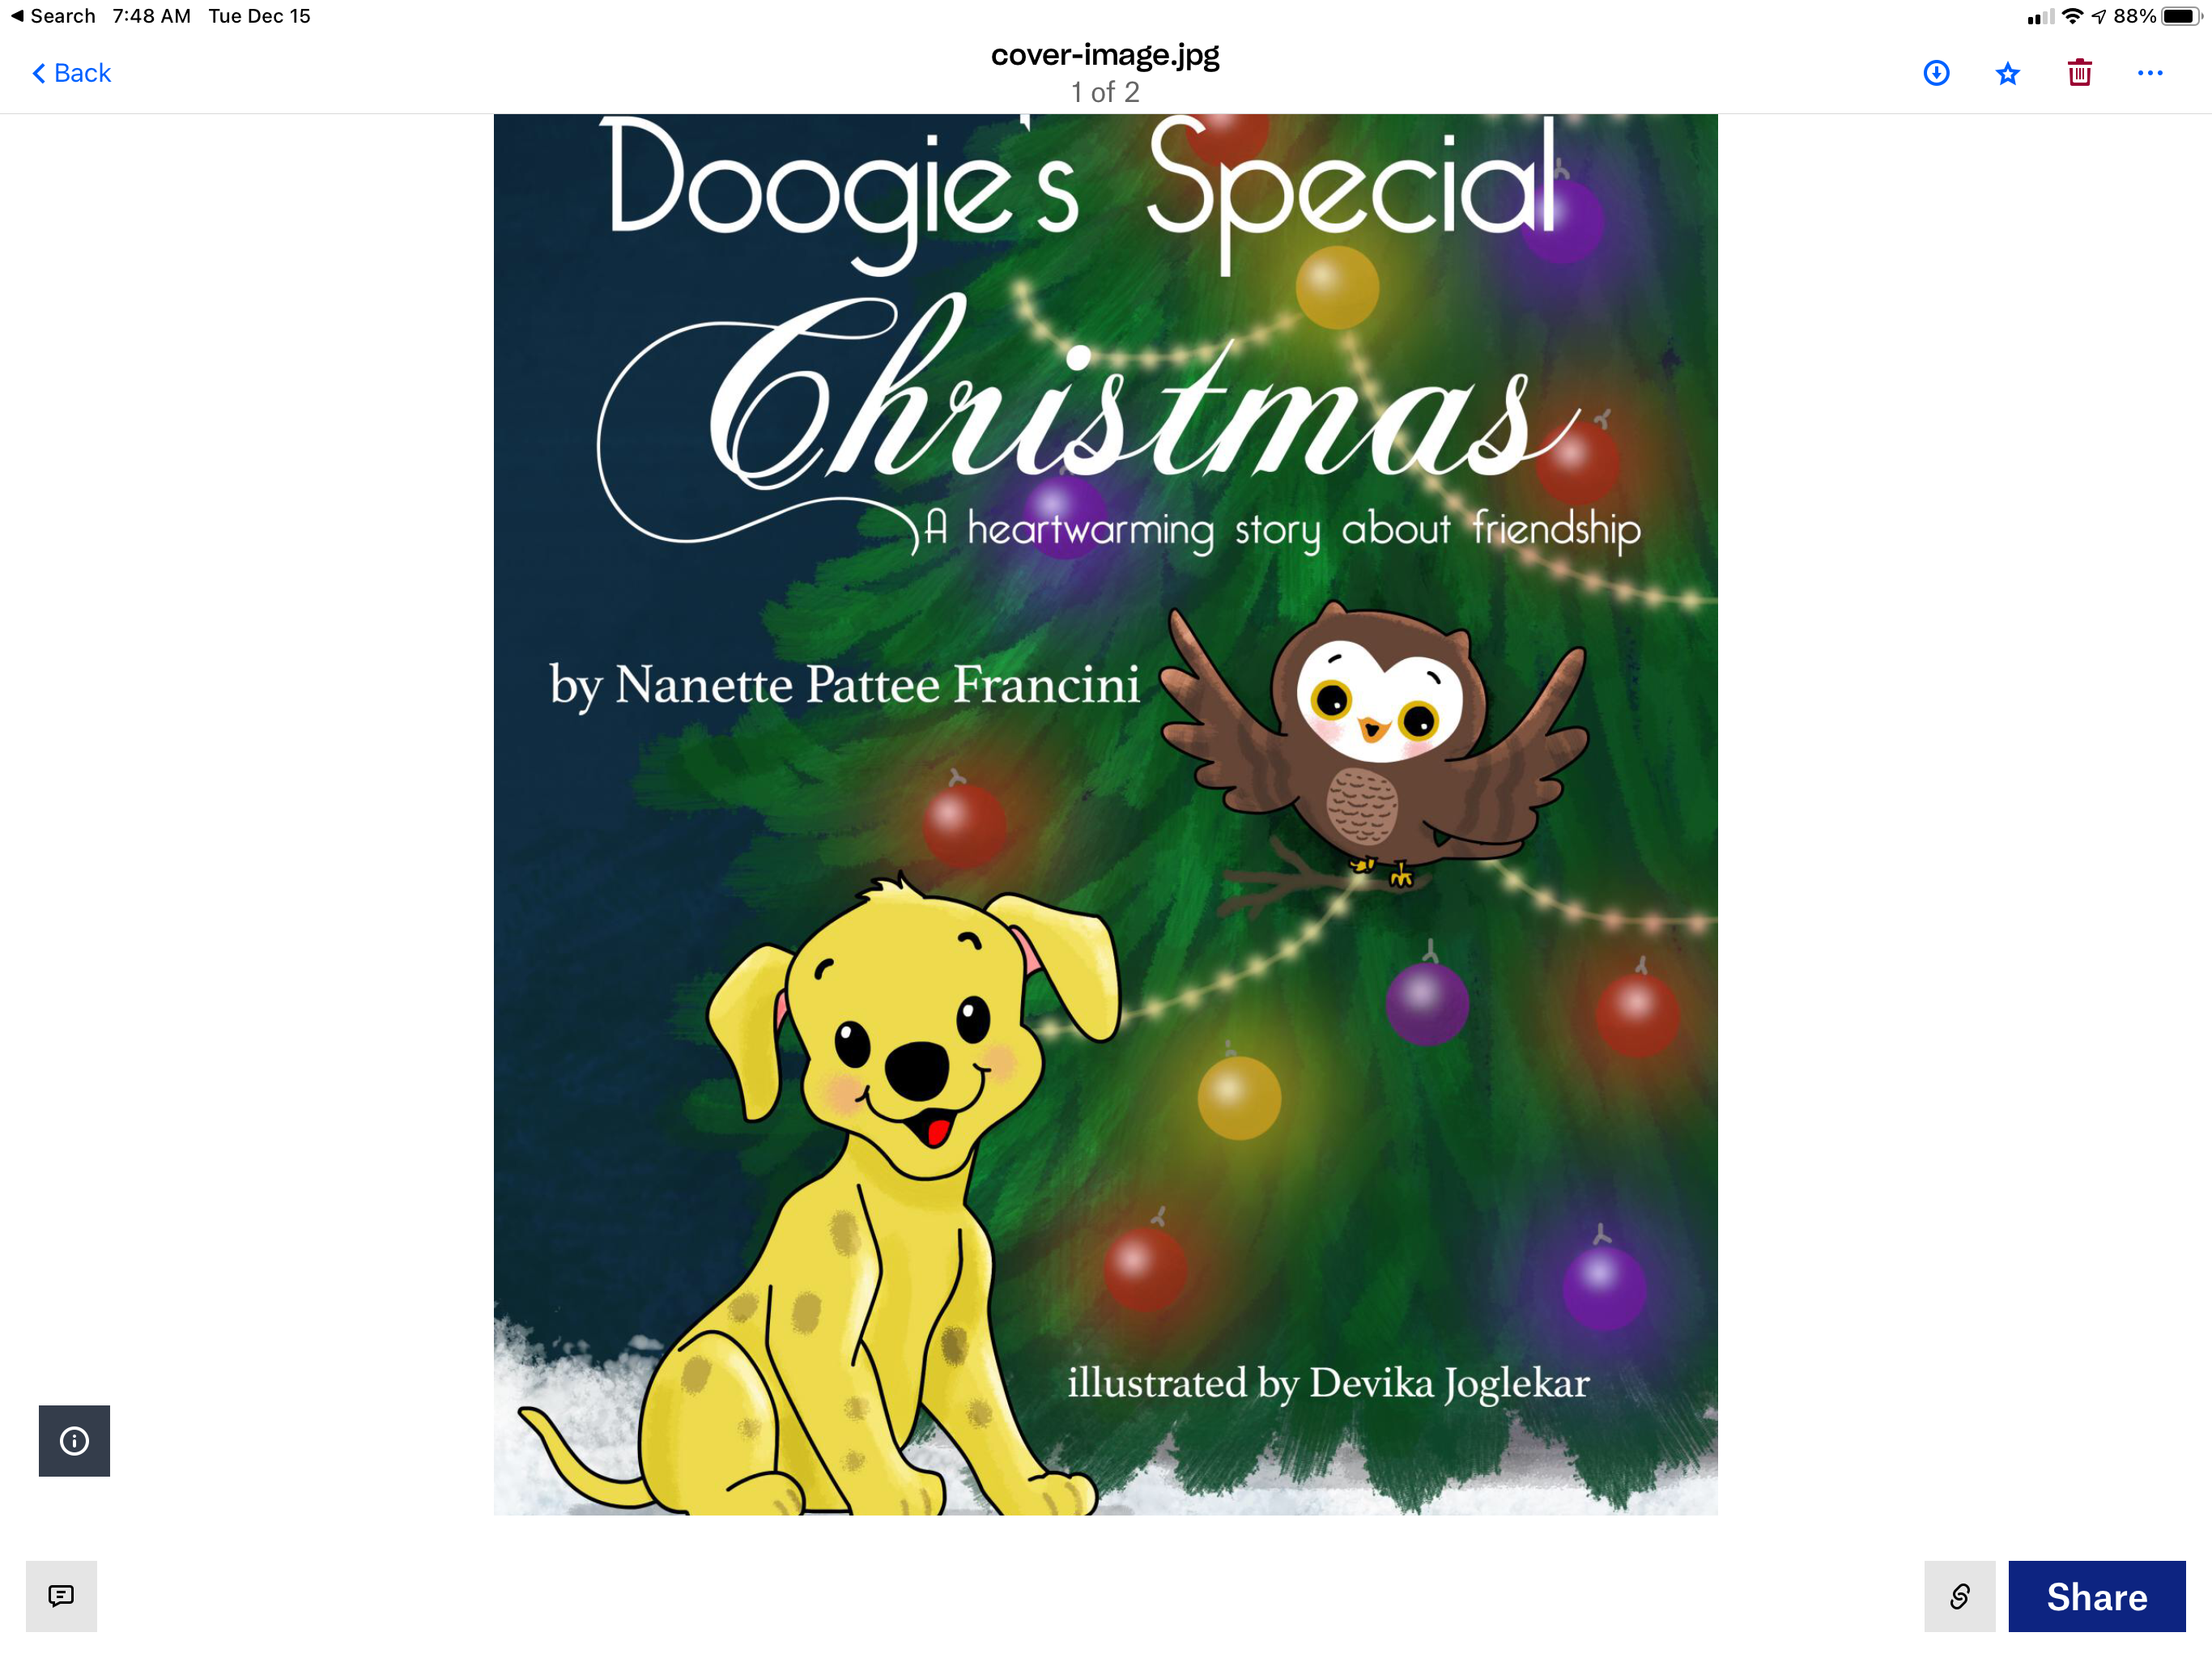 FREE: Doogie’s Special Christmas by Nanette Pattee Francini